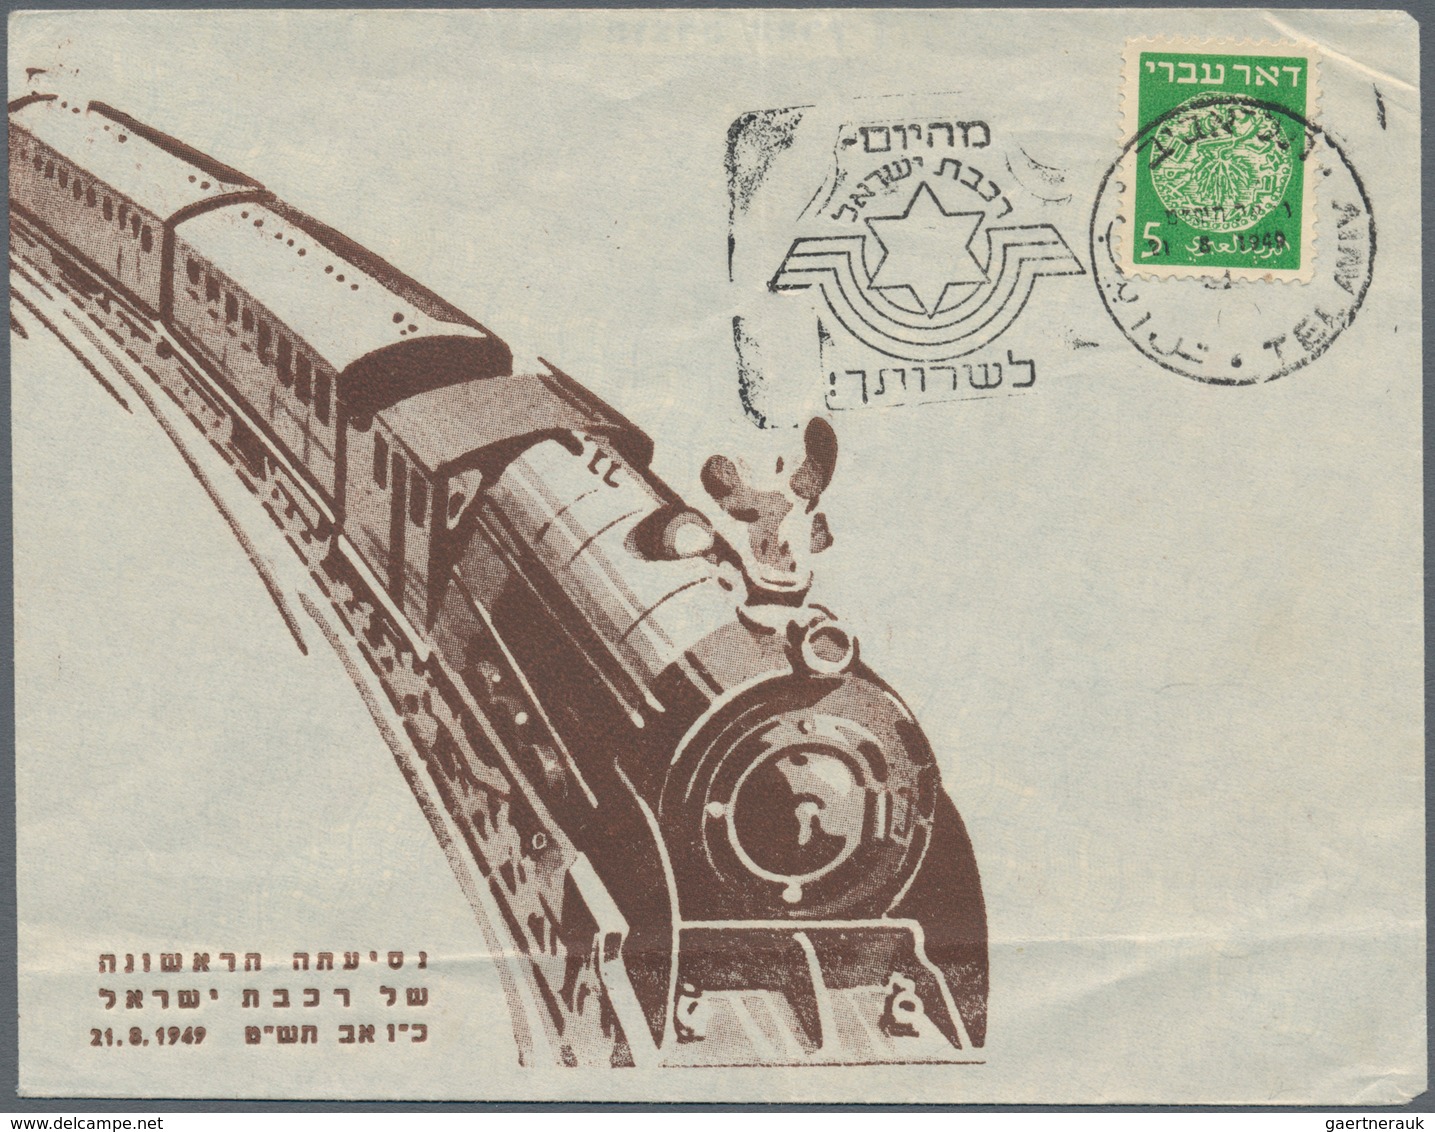 Israel: 1948/1948, SEPCIAL EVENT/SLOGAN POSTMARKS, assortment of apprx. 390 covers (mainly cacheted